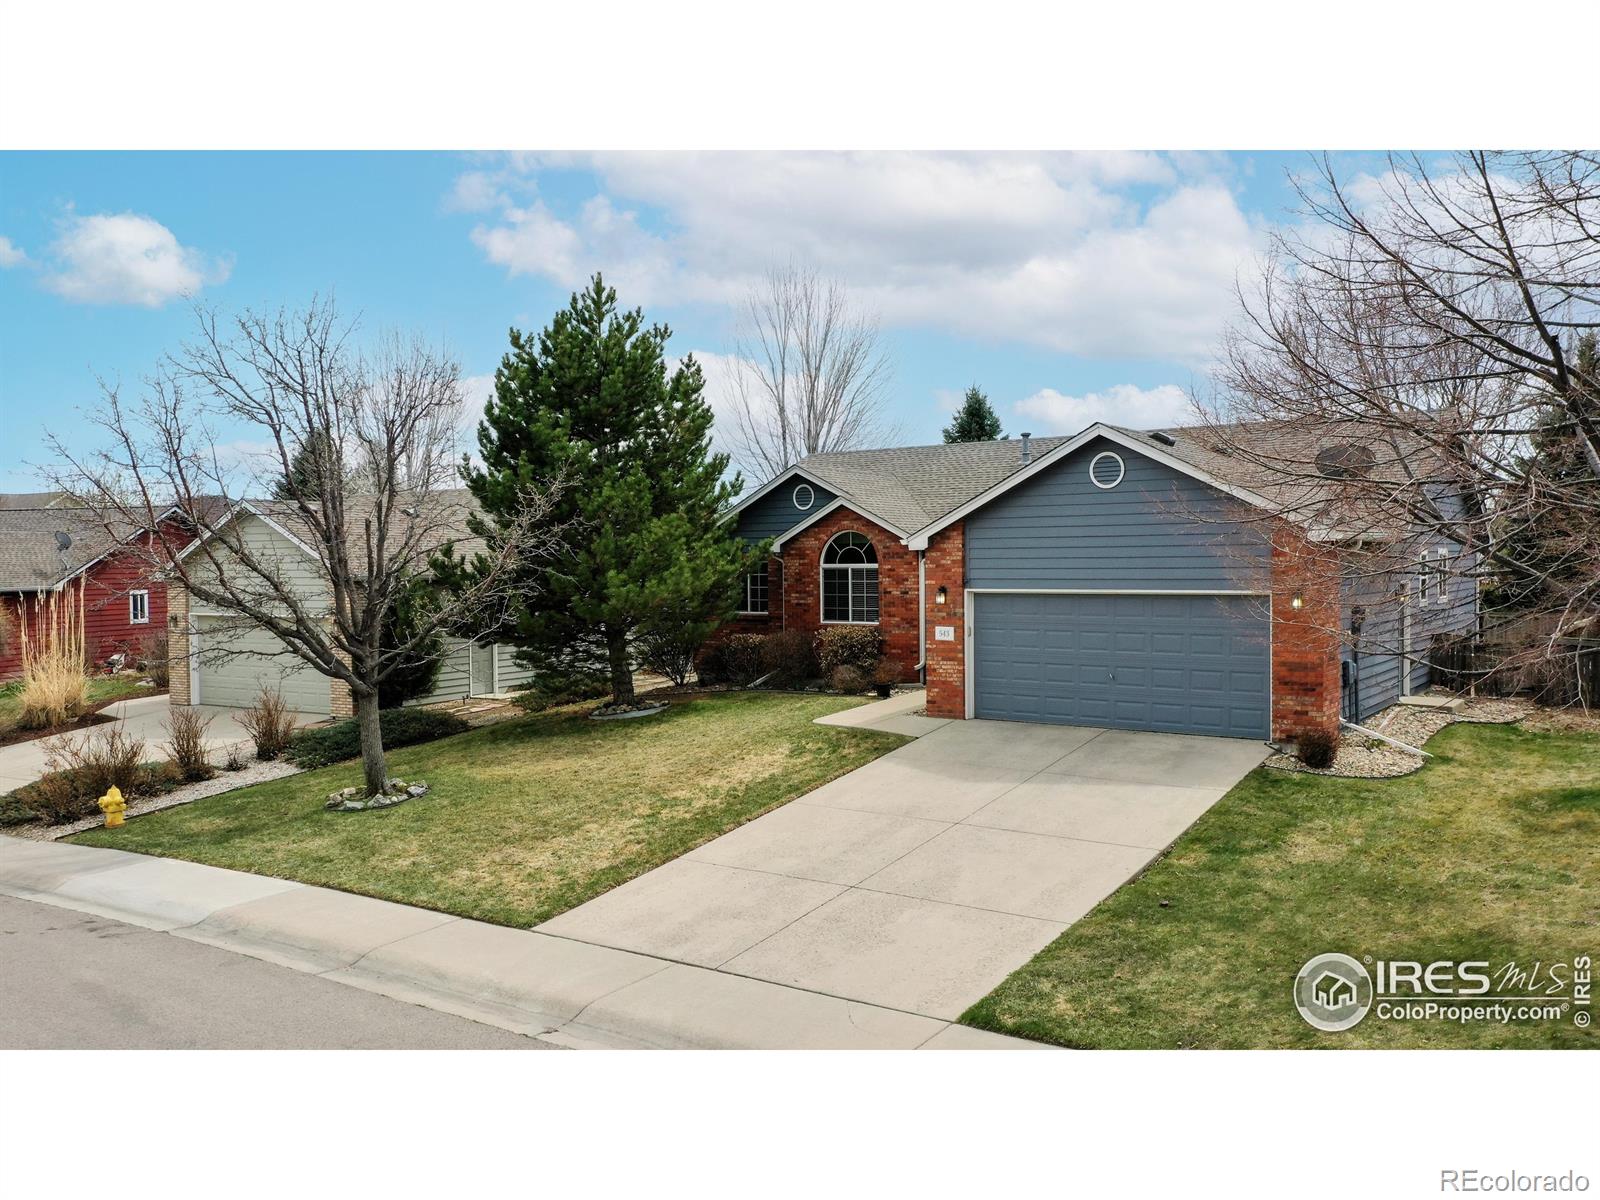 543  Saturn Drive, fort collins MLS: 4567891001467 Beds: 5 Baths: 3 Price: $612,400